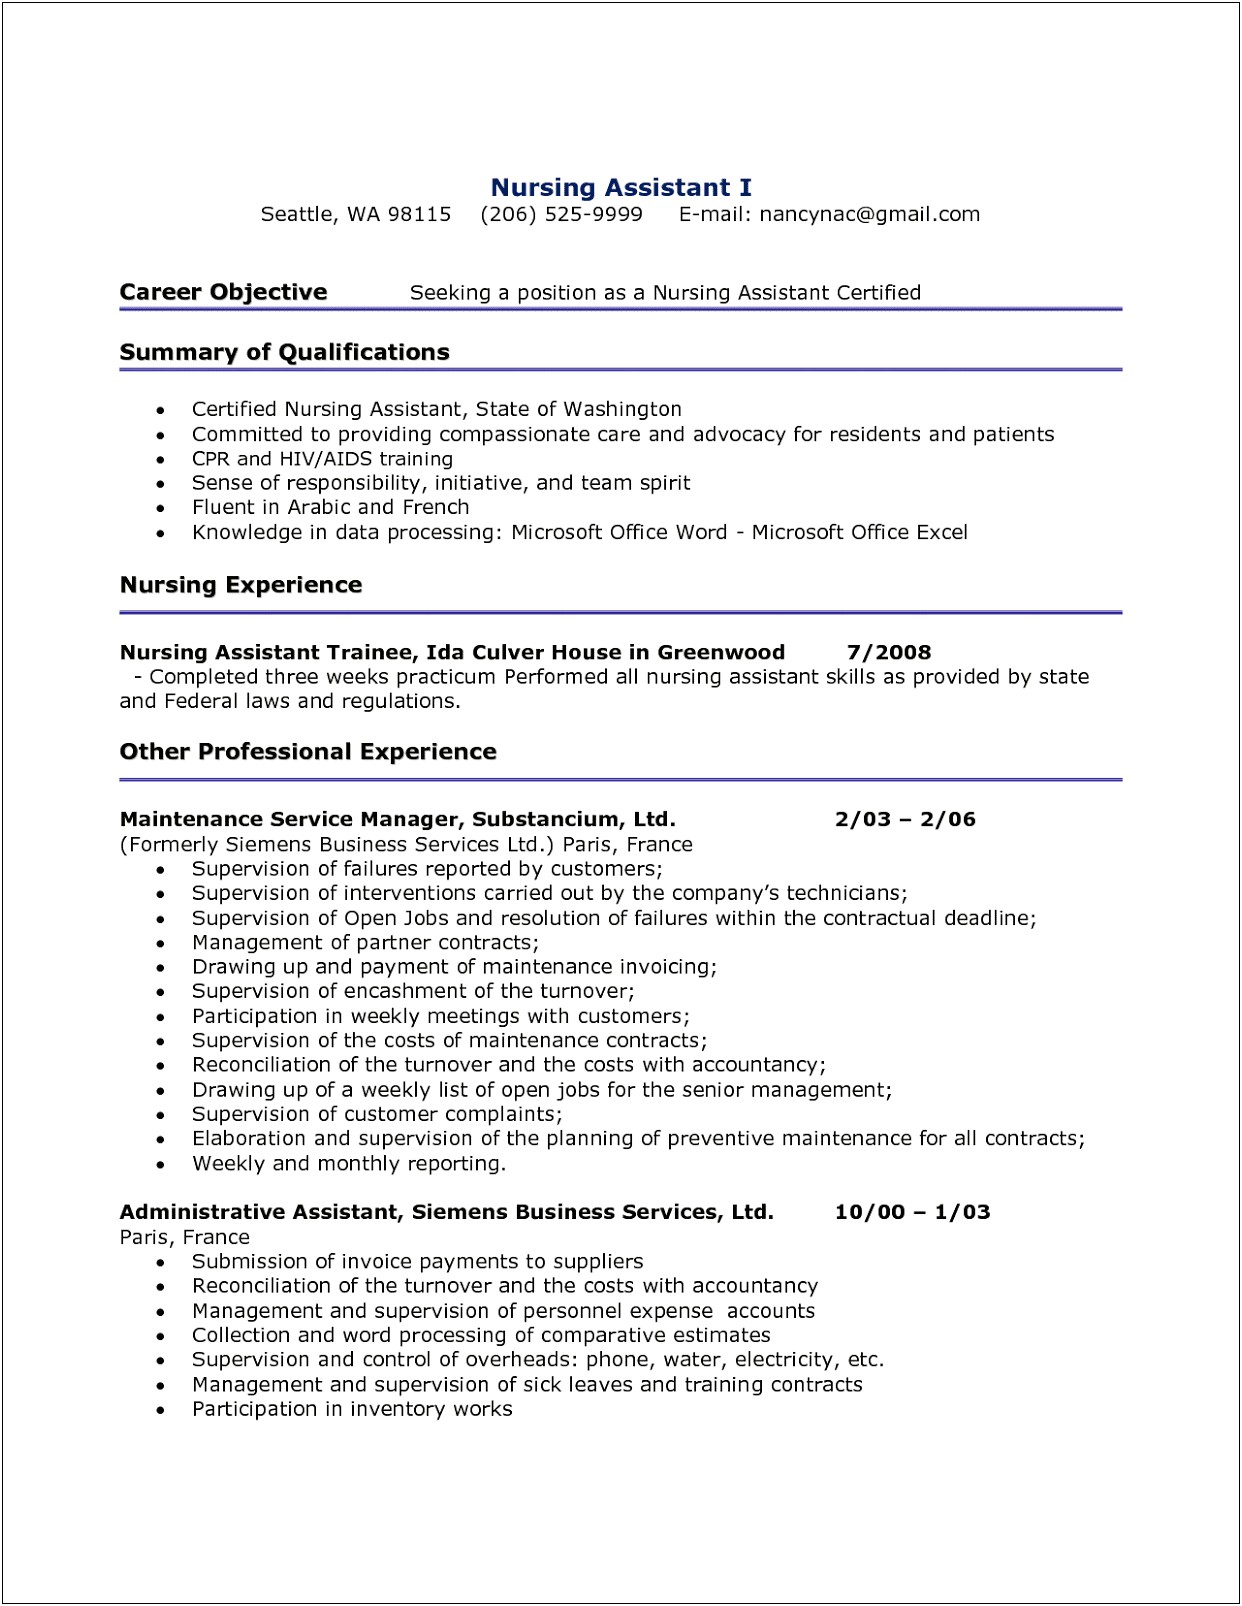 Sample Resume For Nursing Assistant With Experience